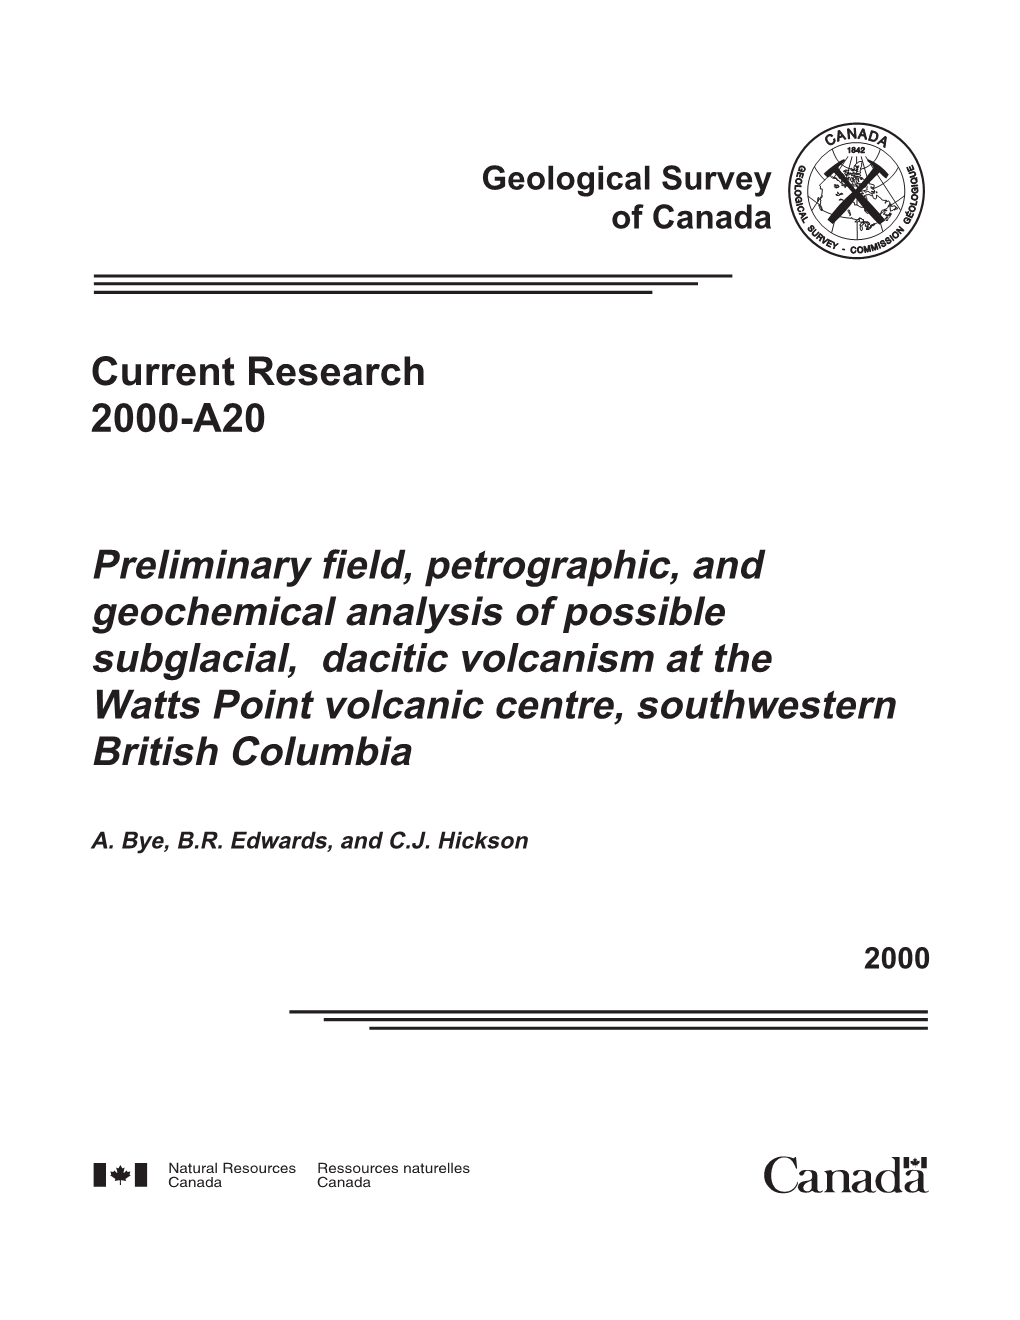 Preliminary Field, Petrographic, and Geochemical Analysis of Possible Subglacial, Dacitic Volcanism at the Watts Point Volcanic Centre, Southwestern British Columbia